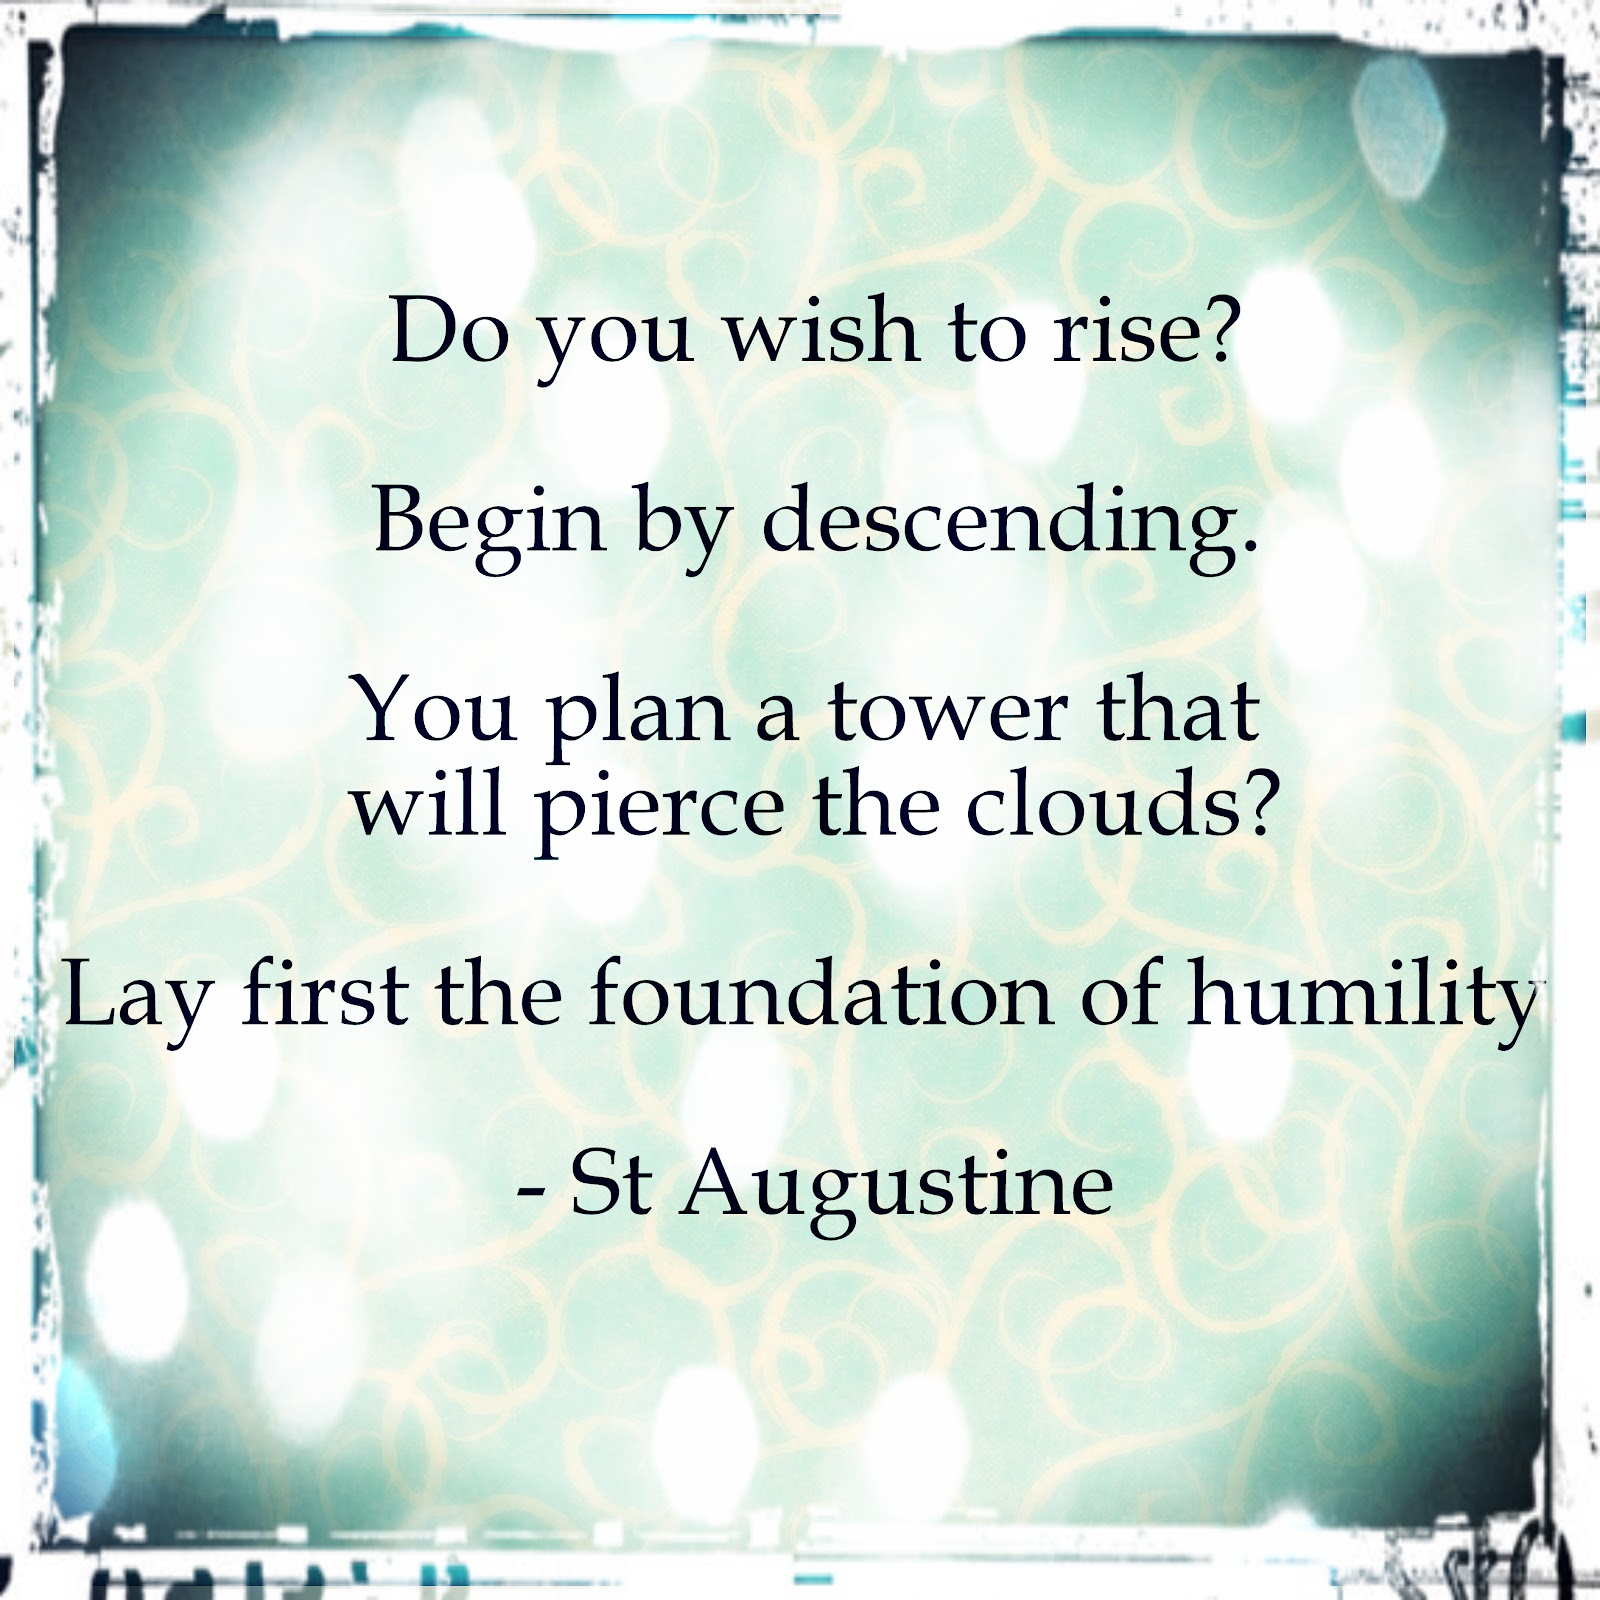 Do you wish to rise1 Begin by descending. You plan a tower that will pierce the clouds1 Lay first the… Saint Augustine. You plan a tower that will pierce the clouds1 Lay… Saint Augustine